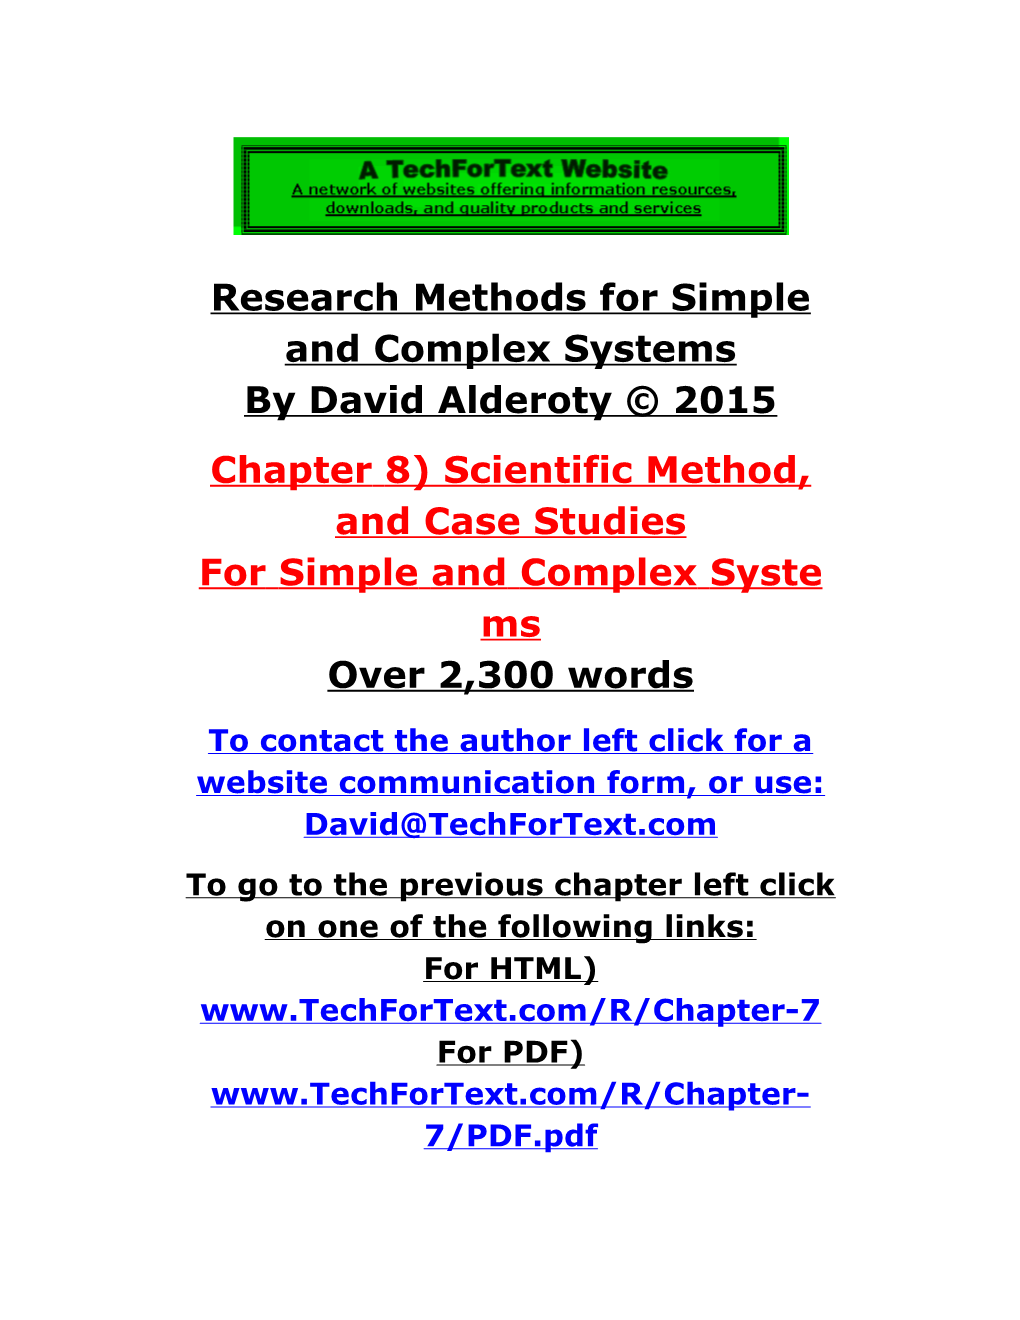 Scientific Method, and Case Studies for Simple and Complex Systems